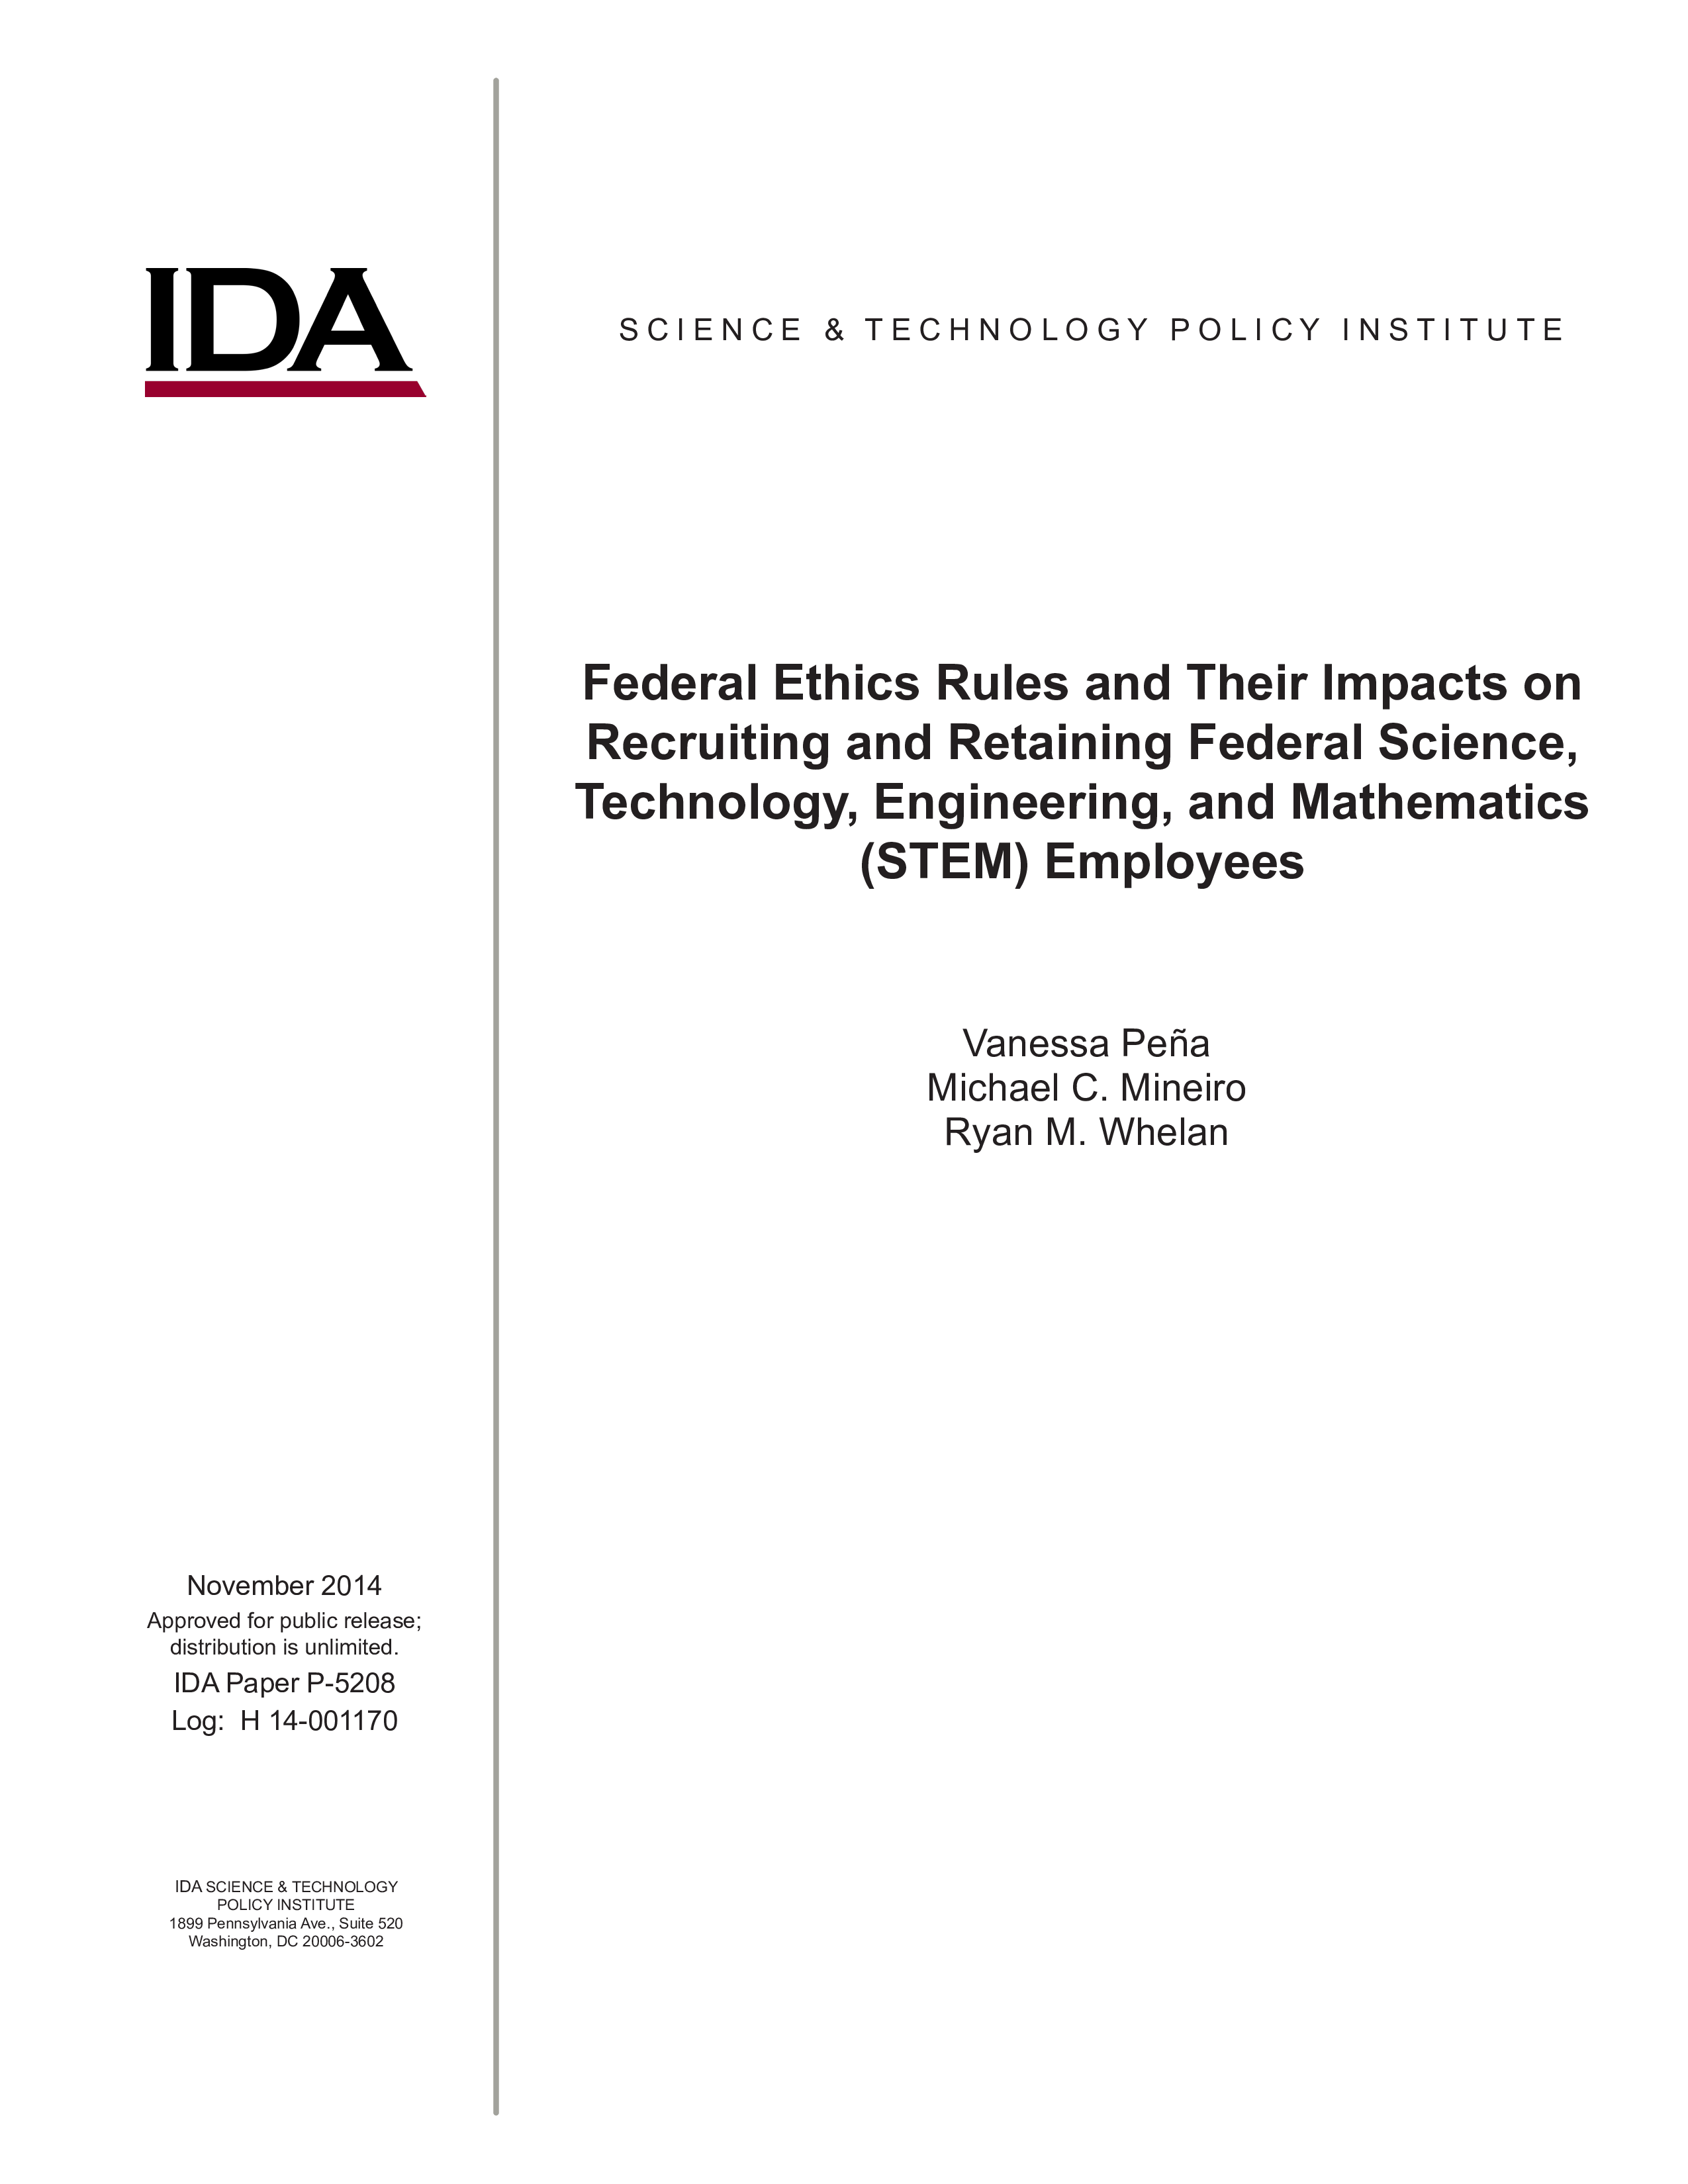 Federal Ethics Rules and Their Impacts on  Recruiting and Retaining Federal Science, Technology, Engineering, and Mathematics (STEM) Employees